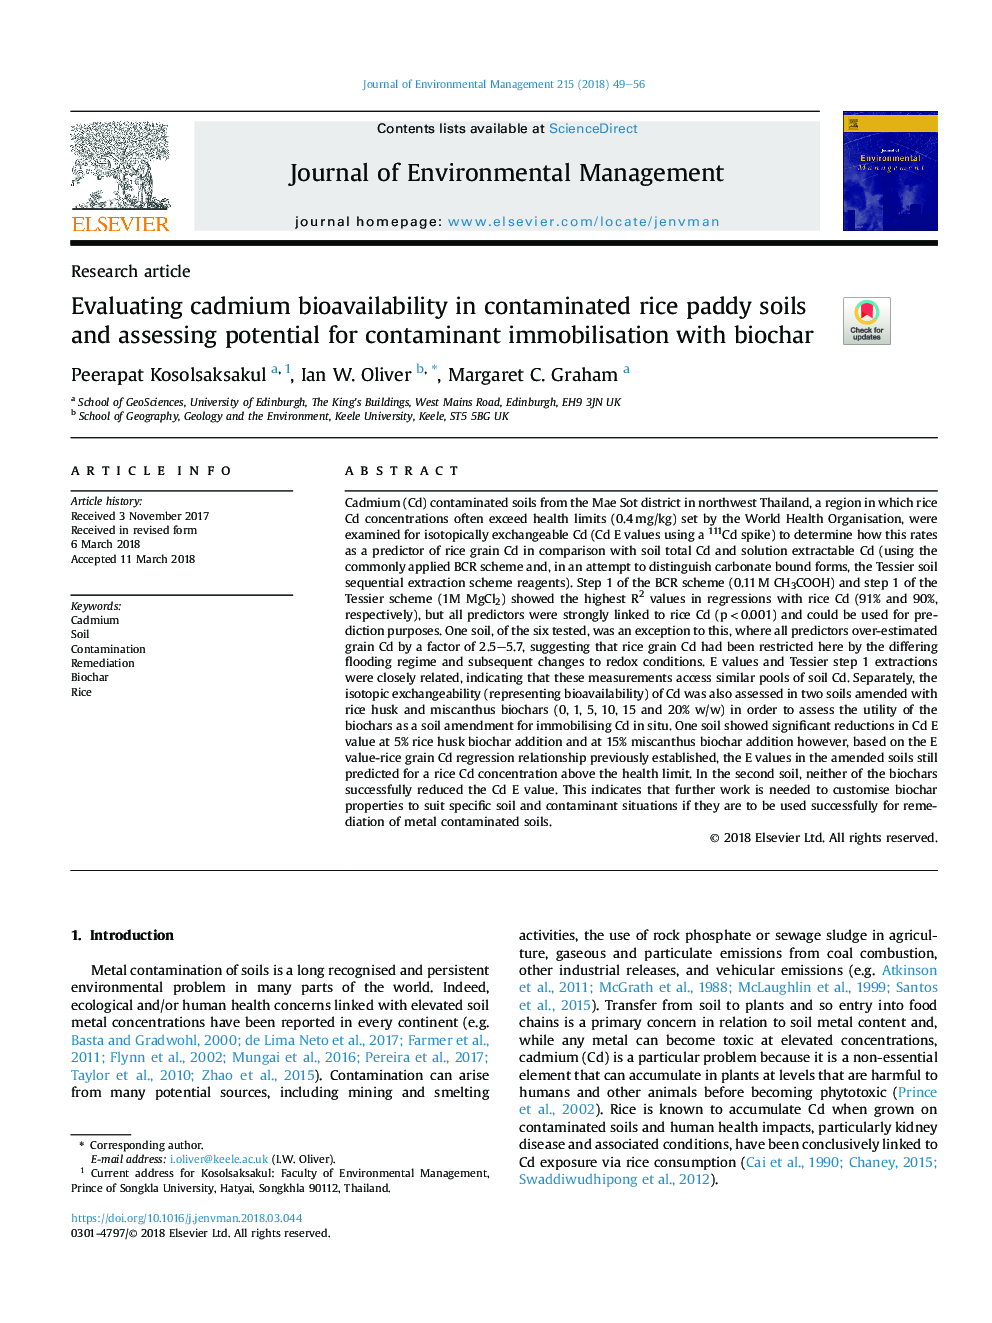 Evaluating cadmium bioavailability in contaminated rice paddy soils and assessing potential for contaminant immobilisation with biochar